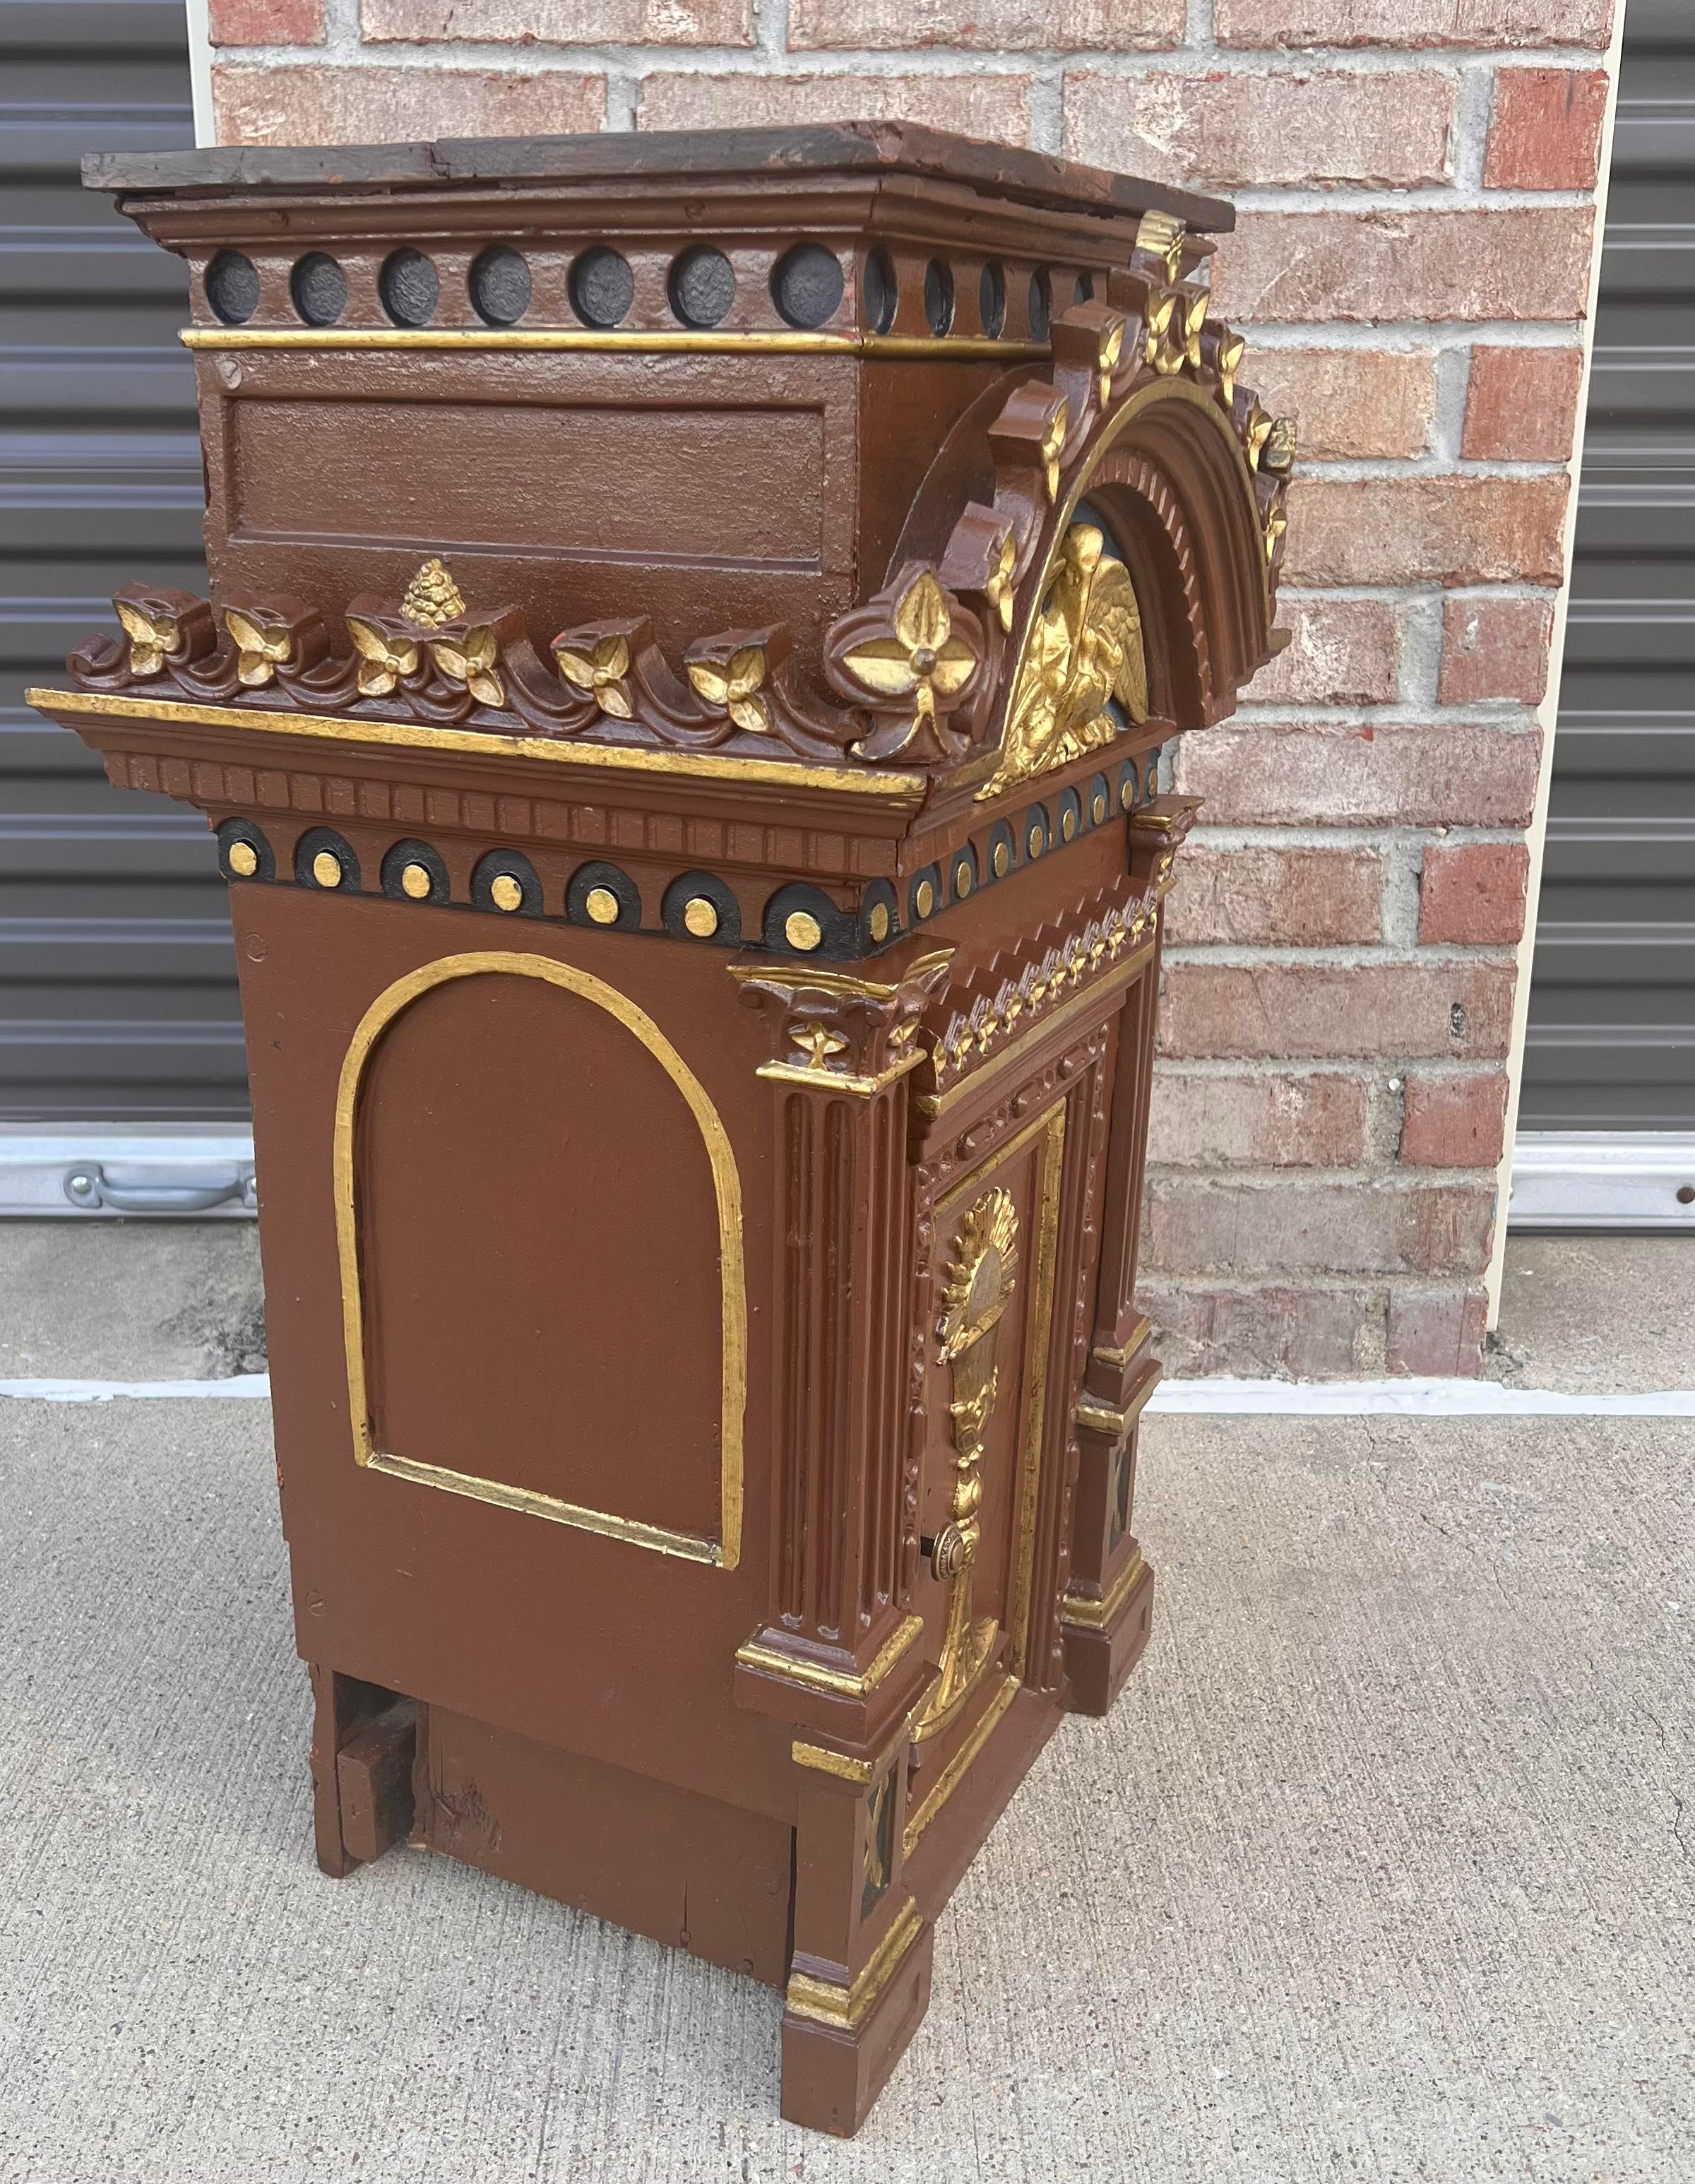 wooden tabernacle